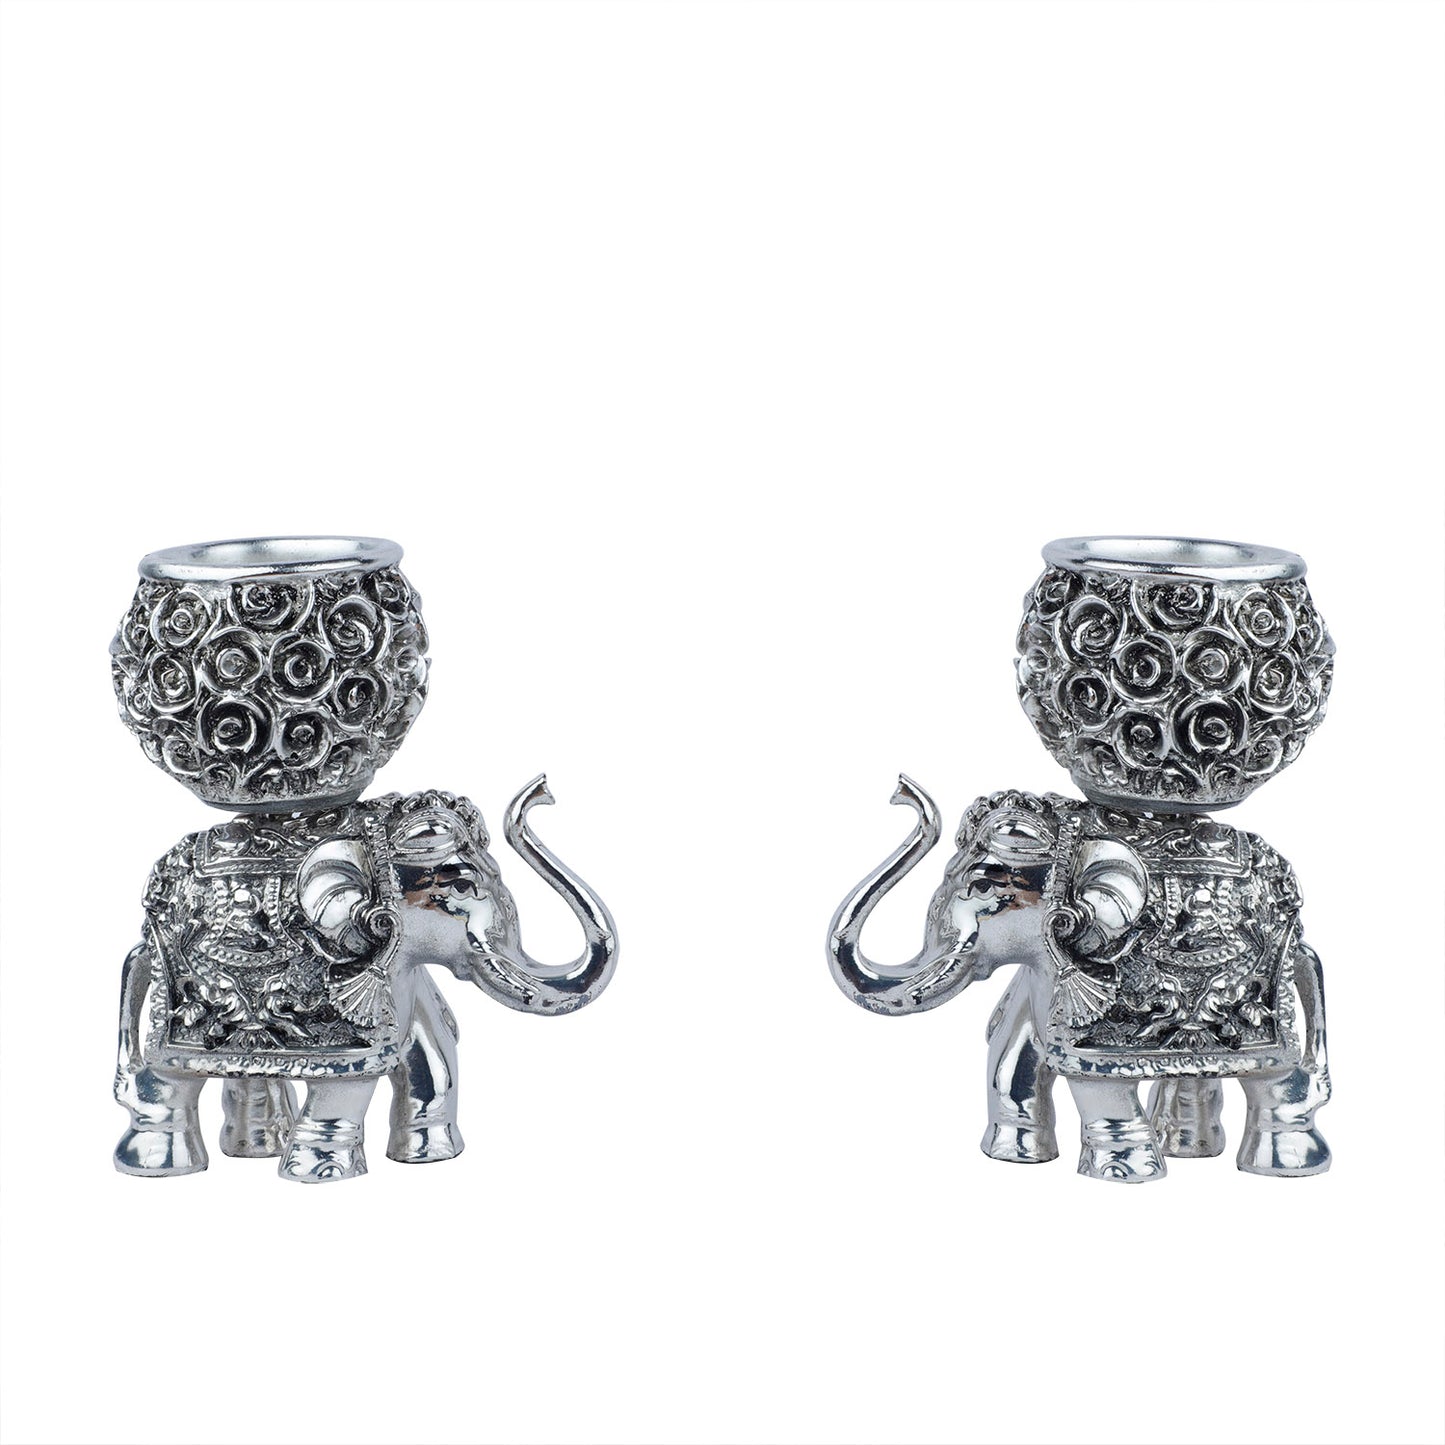 Elephant with t light holder - PAIR